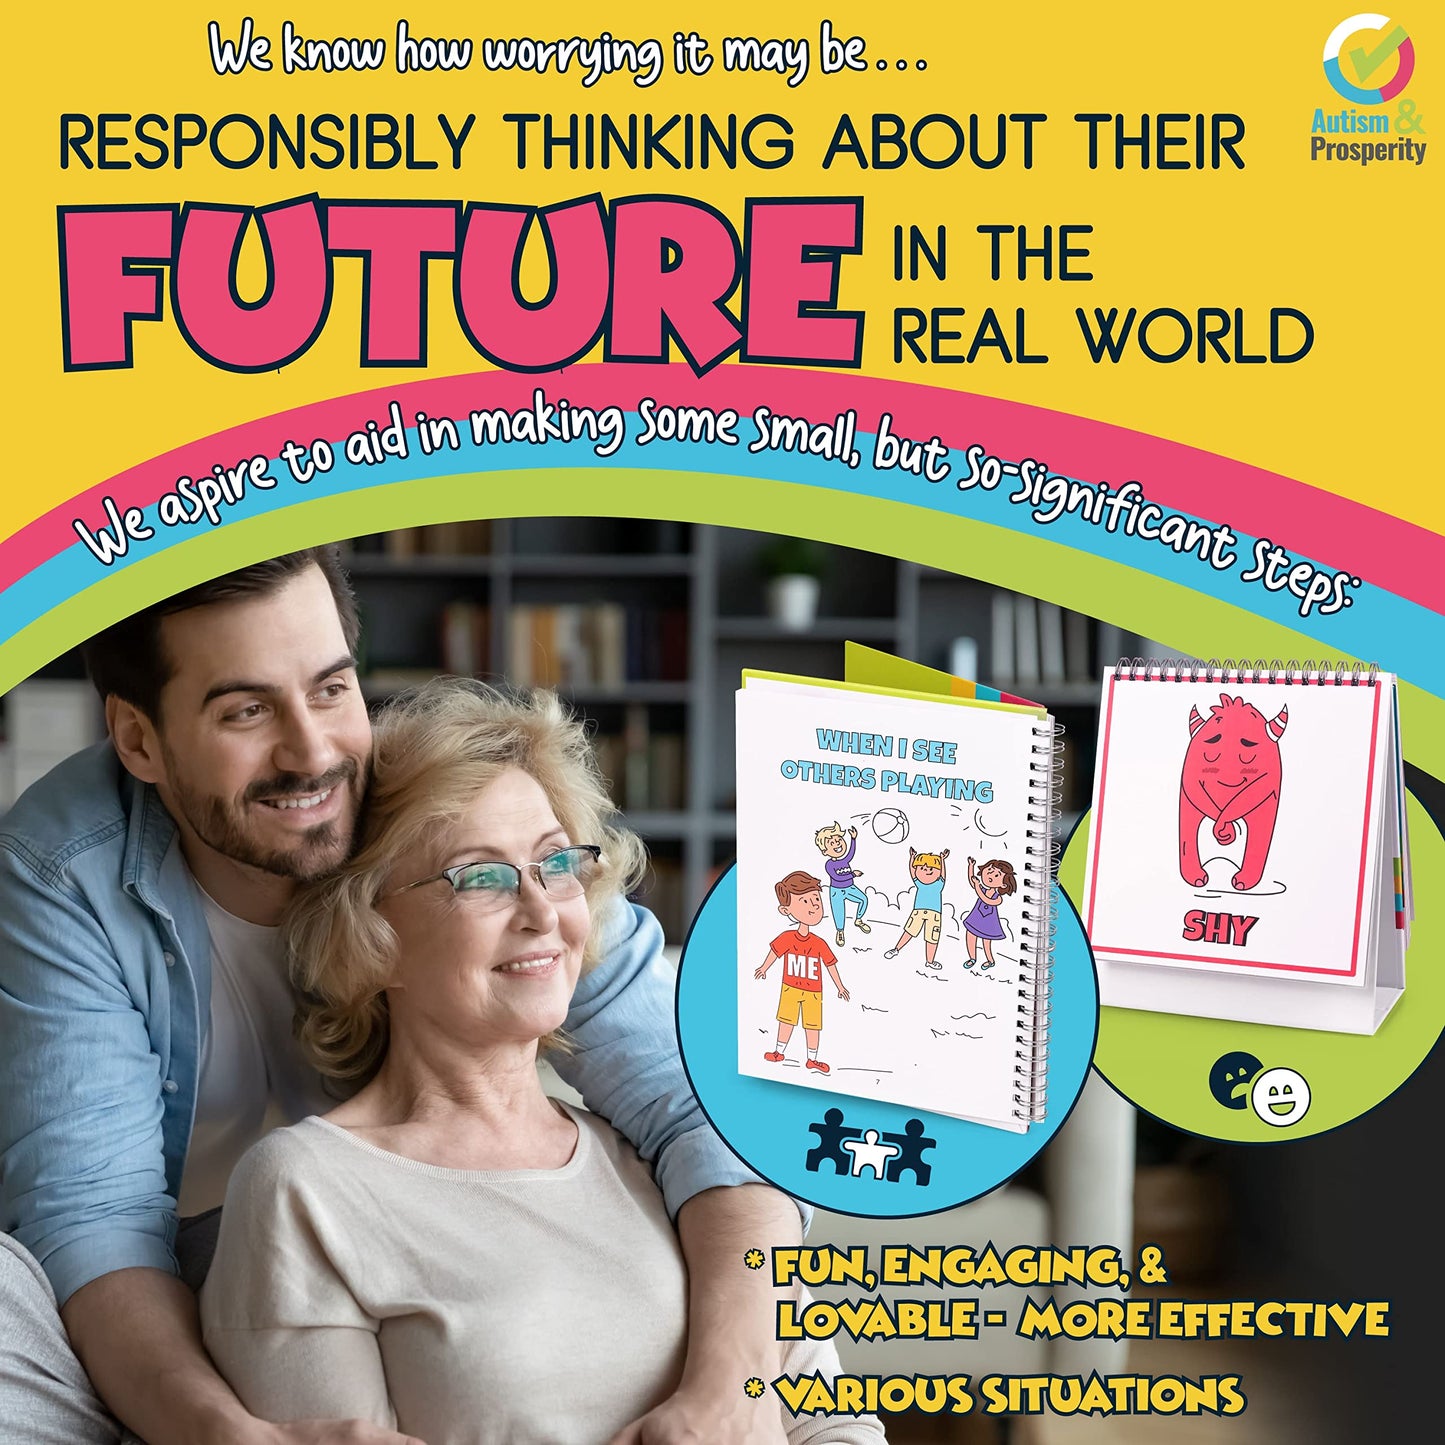 Autism & Prosperity Kids Emotions & Social Life Skills Autistic Children Set ASD Child Boys Girl Teen Learning Materials Toys Game Sensory Special Needs No 1-3 Toddlers Age Gifts 3 4 5-7 8-12 Products